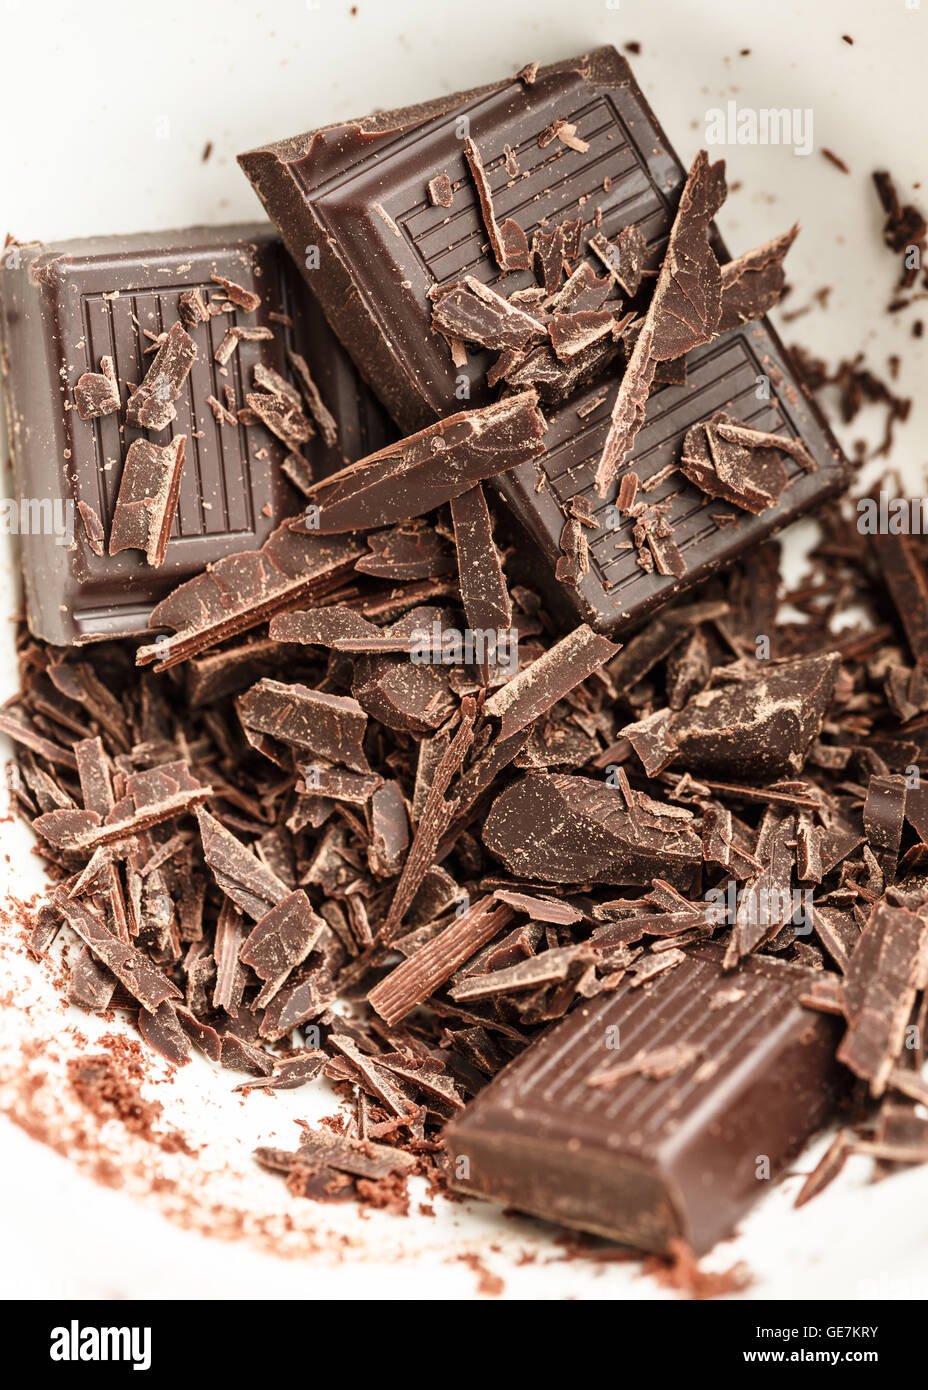 chocolate bar and shavings a white bowl Stock Photo